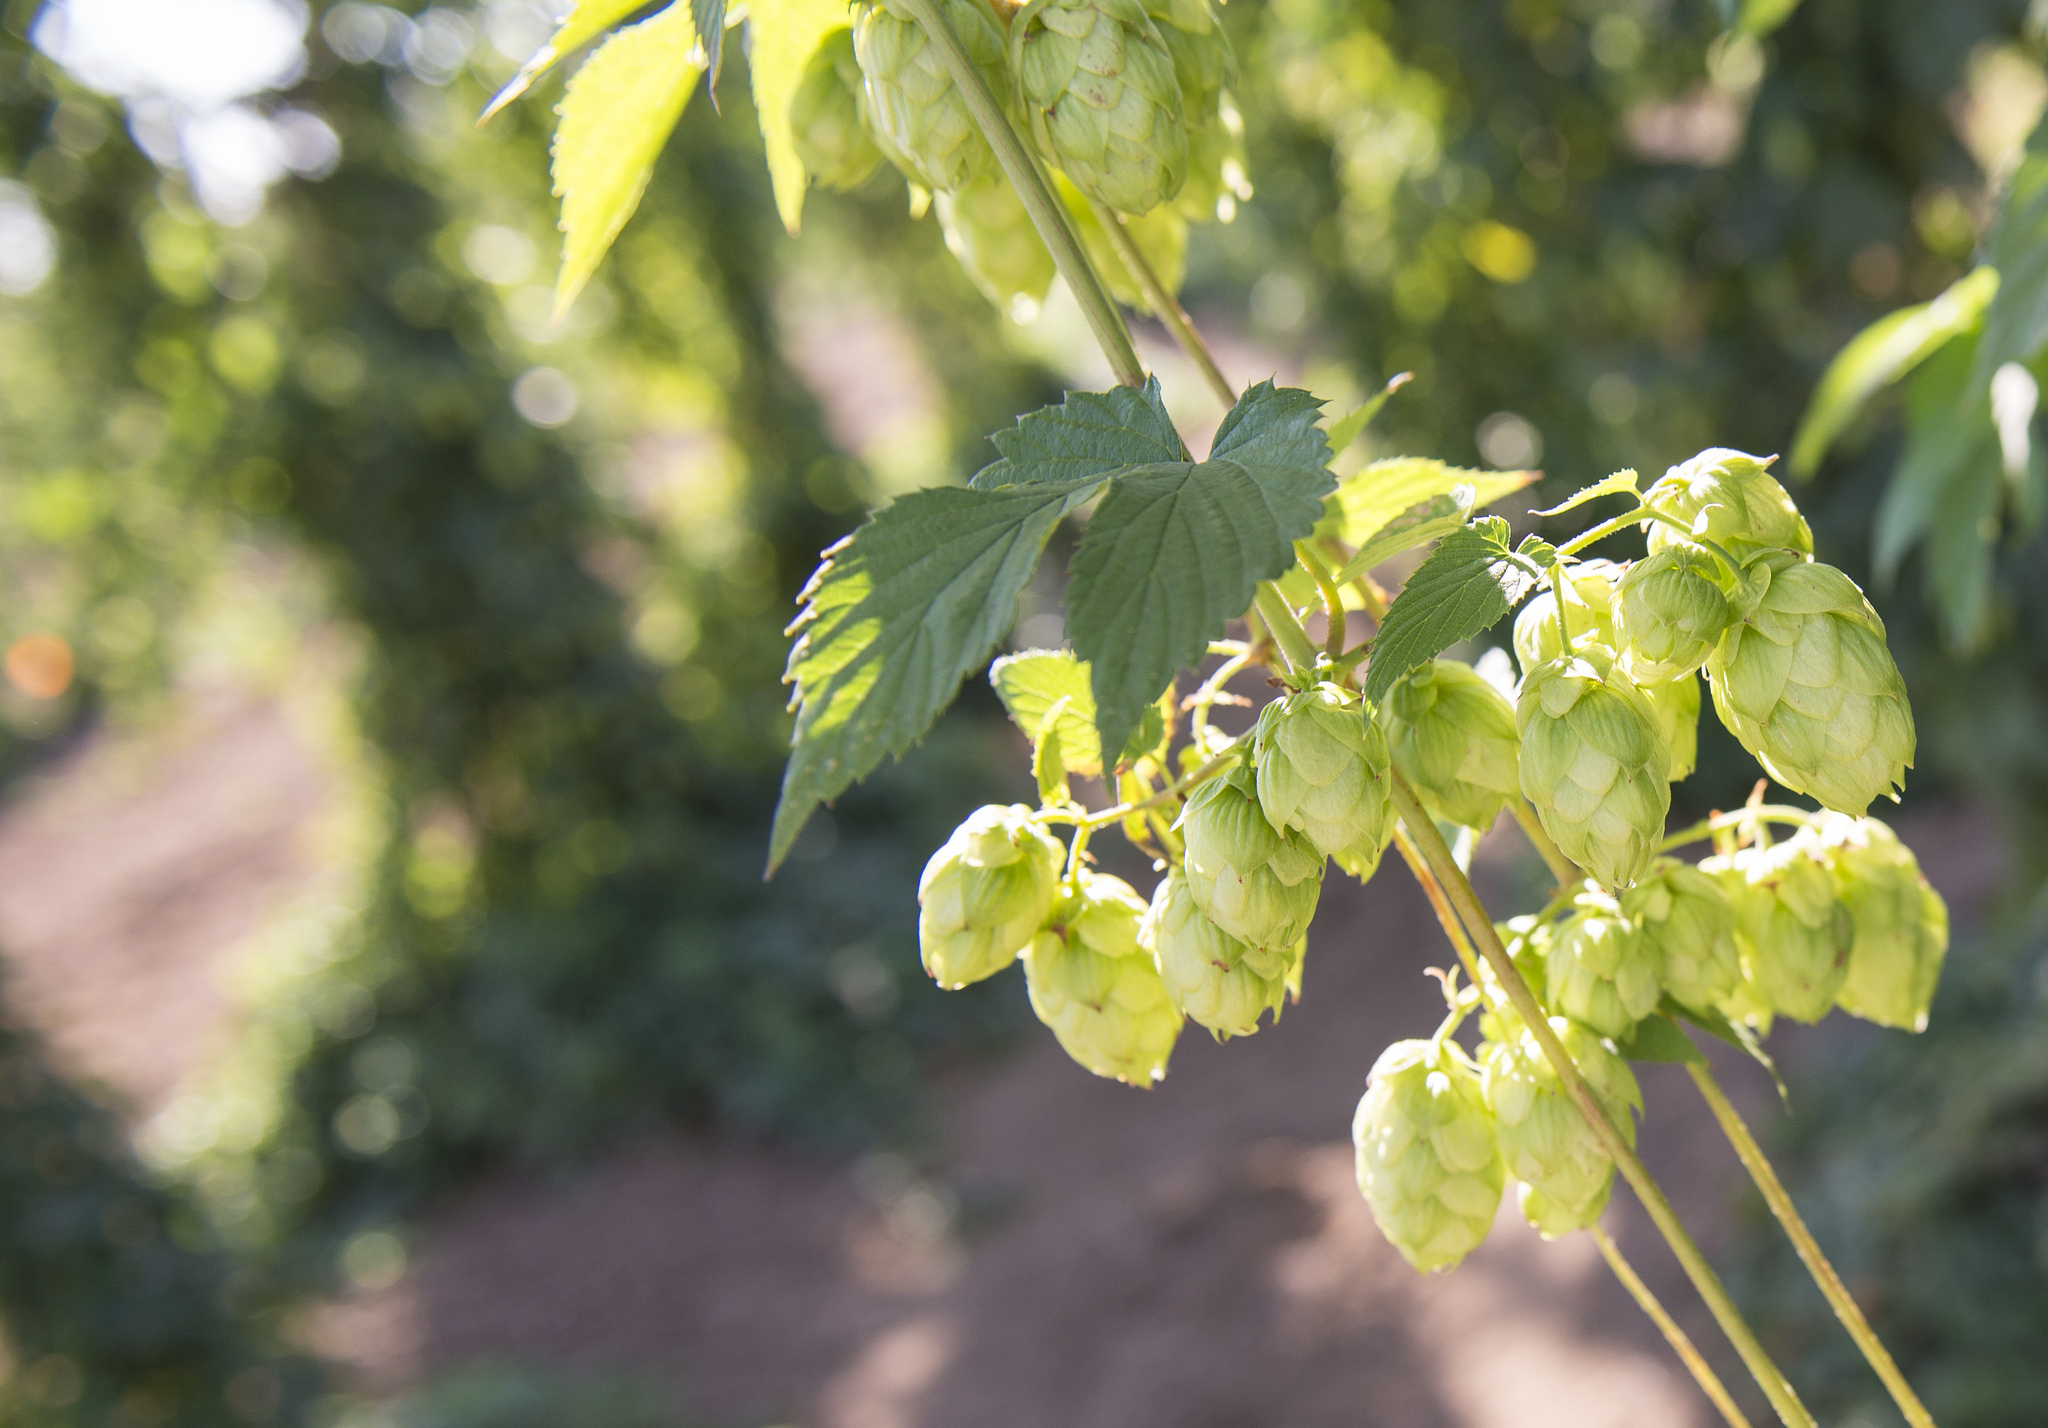 Brewing beer? Go a step further and grow your own hops